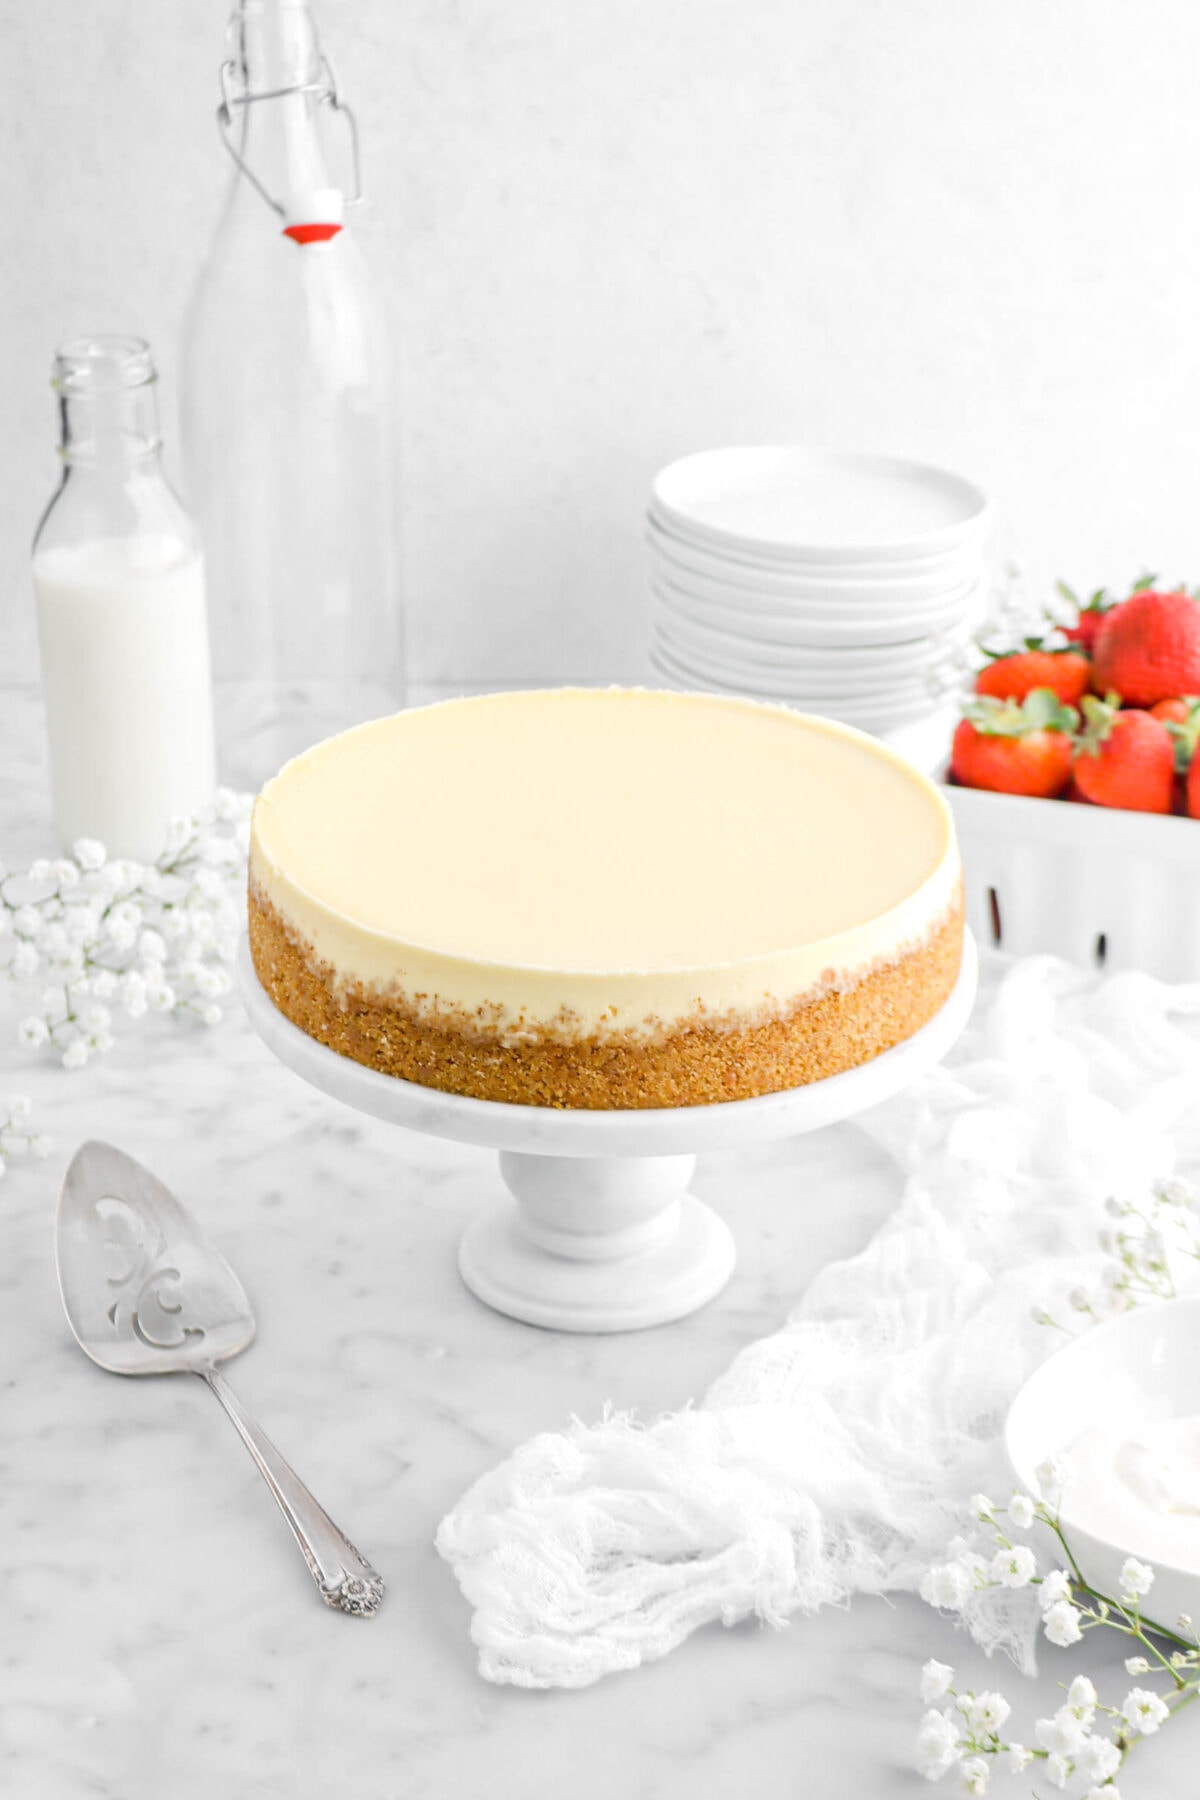 angled shot of cheesecake on marble cake plate with cake knife, and a white napkin beside, a glass of milk, stack of white plates, and basket of strawberries behind